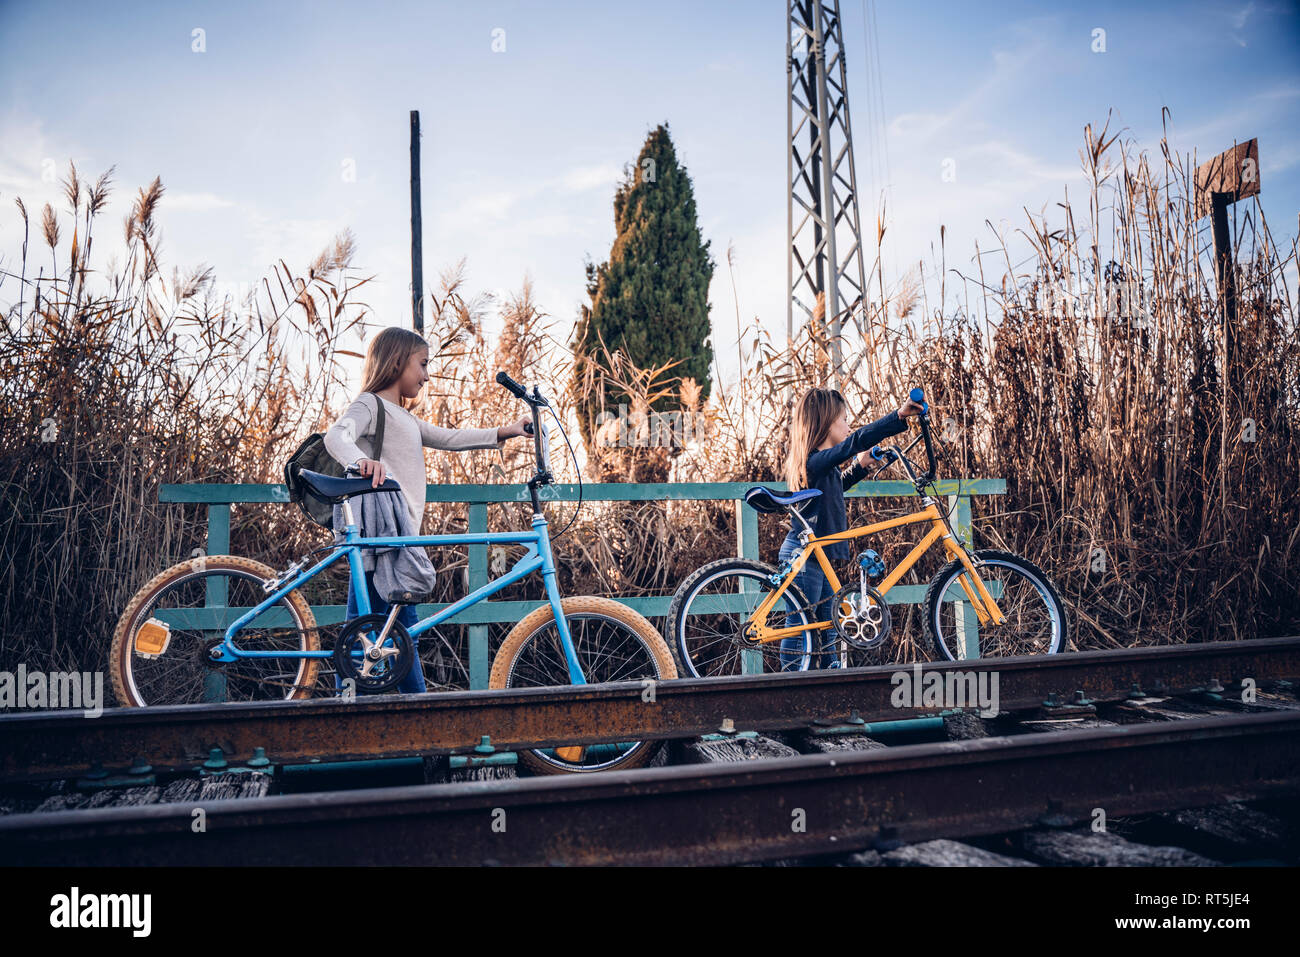 Two girls walking on the train track with bicycles Stock Photo